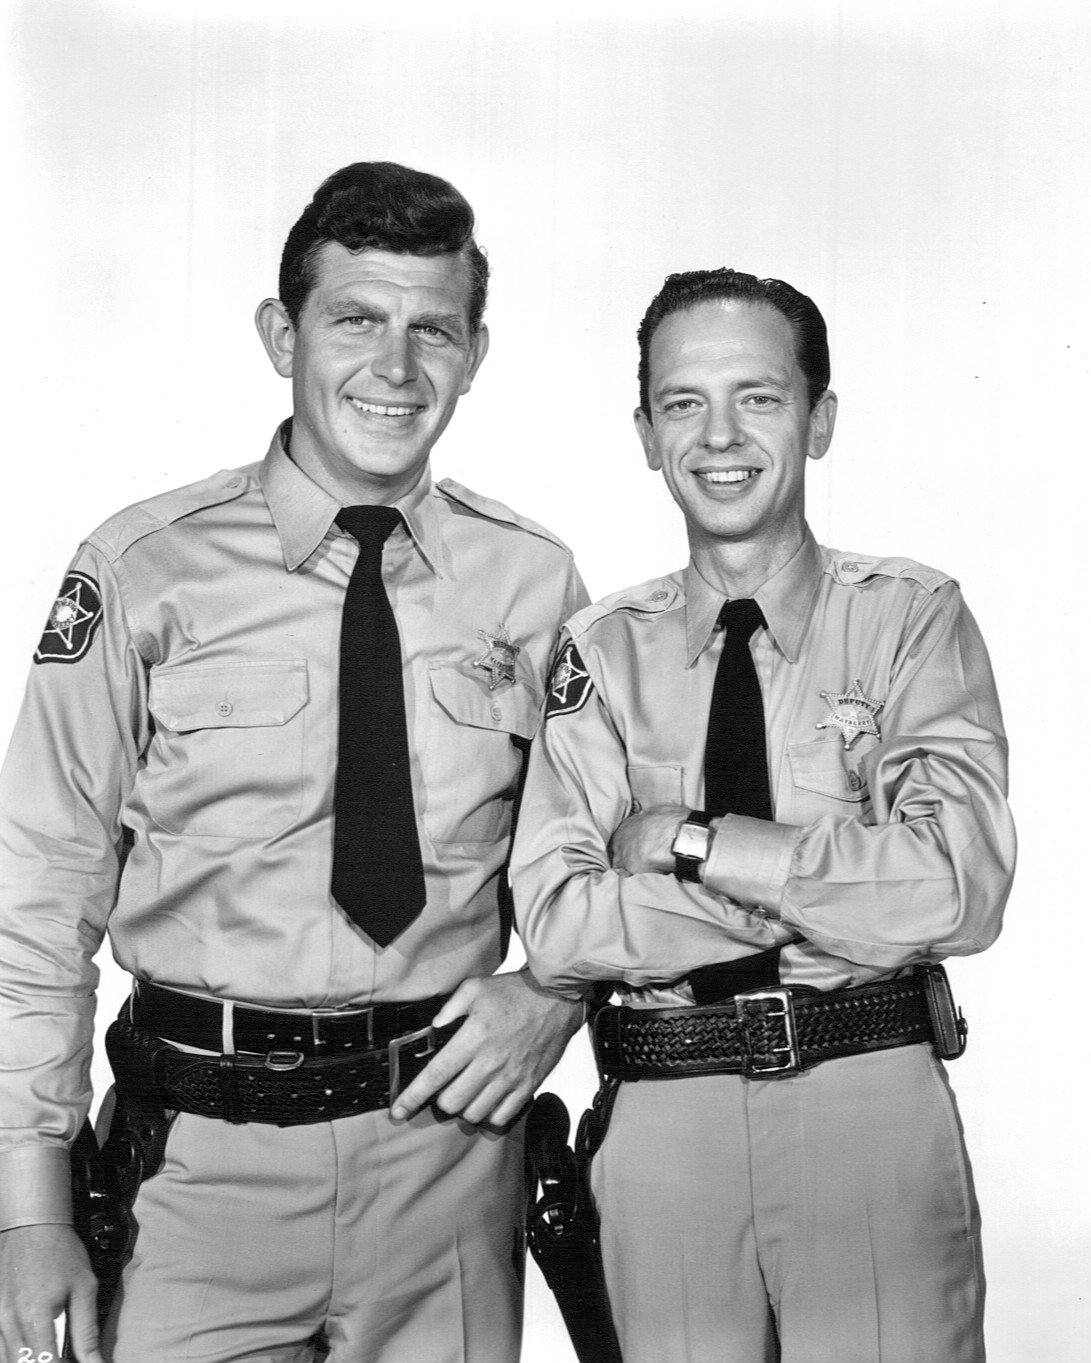 Andy Griffith as Sheriff Andy Taylor and Don Knotts as Deputy Barney Fife from the premiere of "The Andy Griffith Show." | Source: Wikimedia Commons